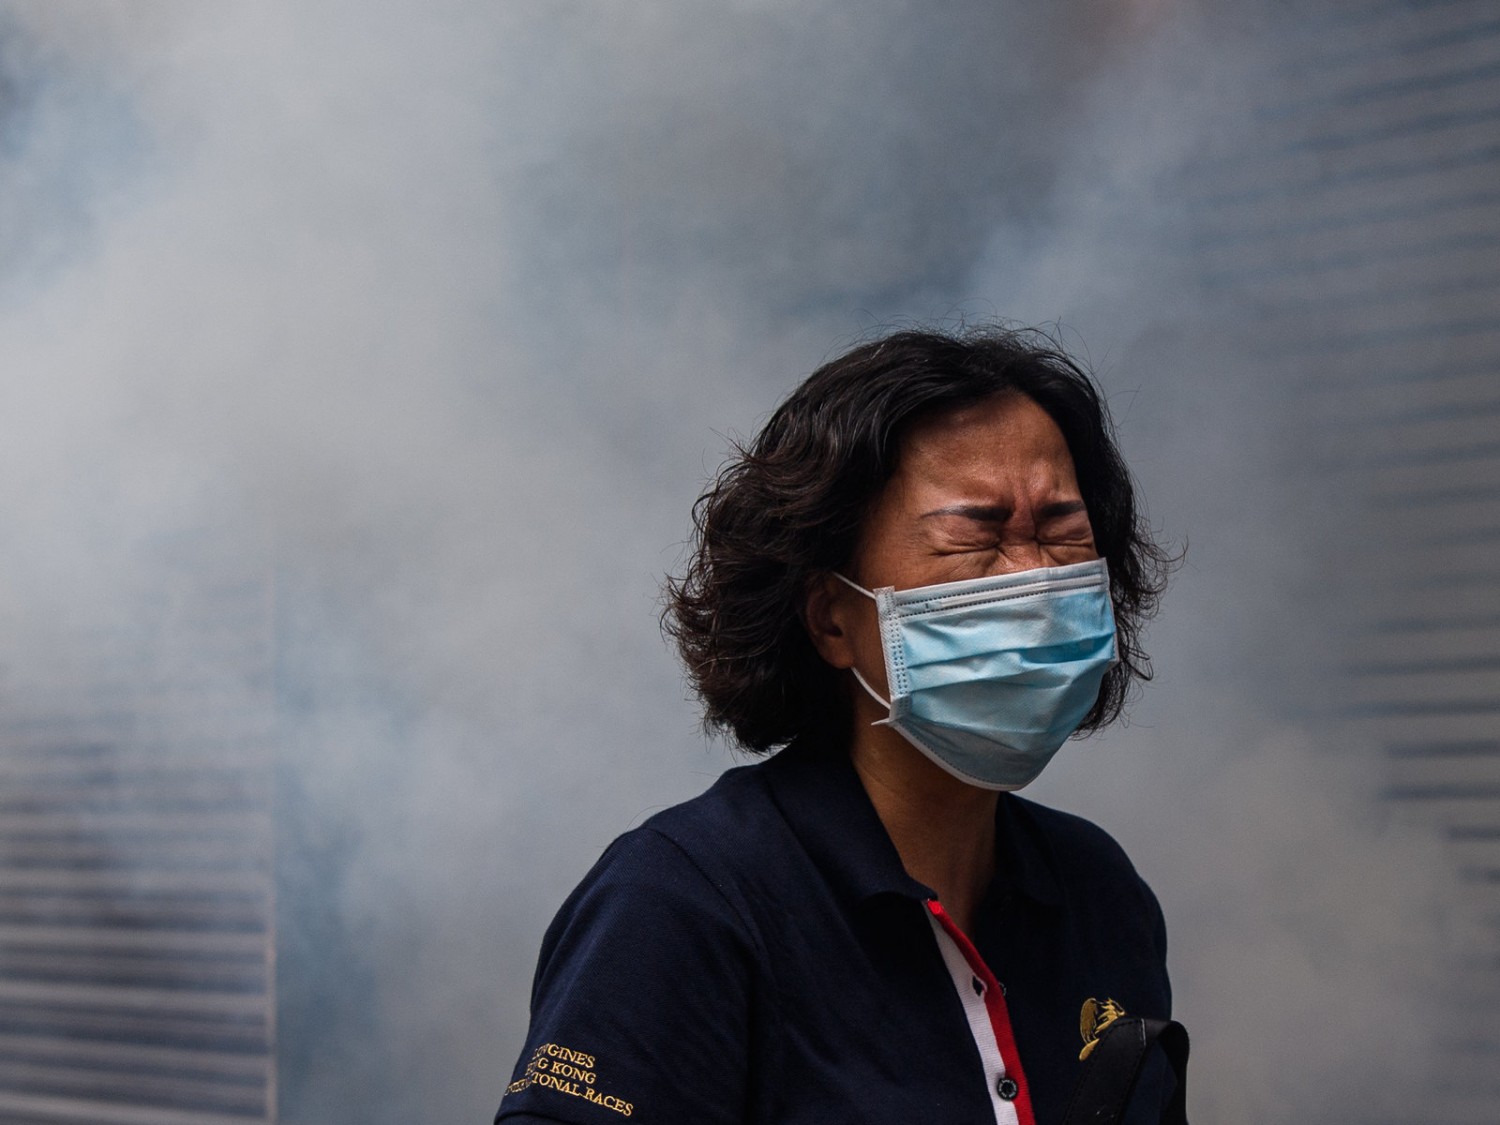 Hong Kong police fired tear gas, pepper spray and water cannons as thousands of protesters rallied against proposed security measures aimed at tightening Beijing's grip on the semi-autonomous territory. Anthony Wallace/AFP via Getty Images